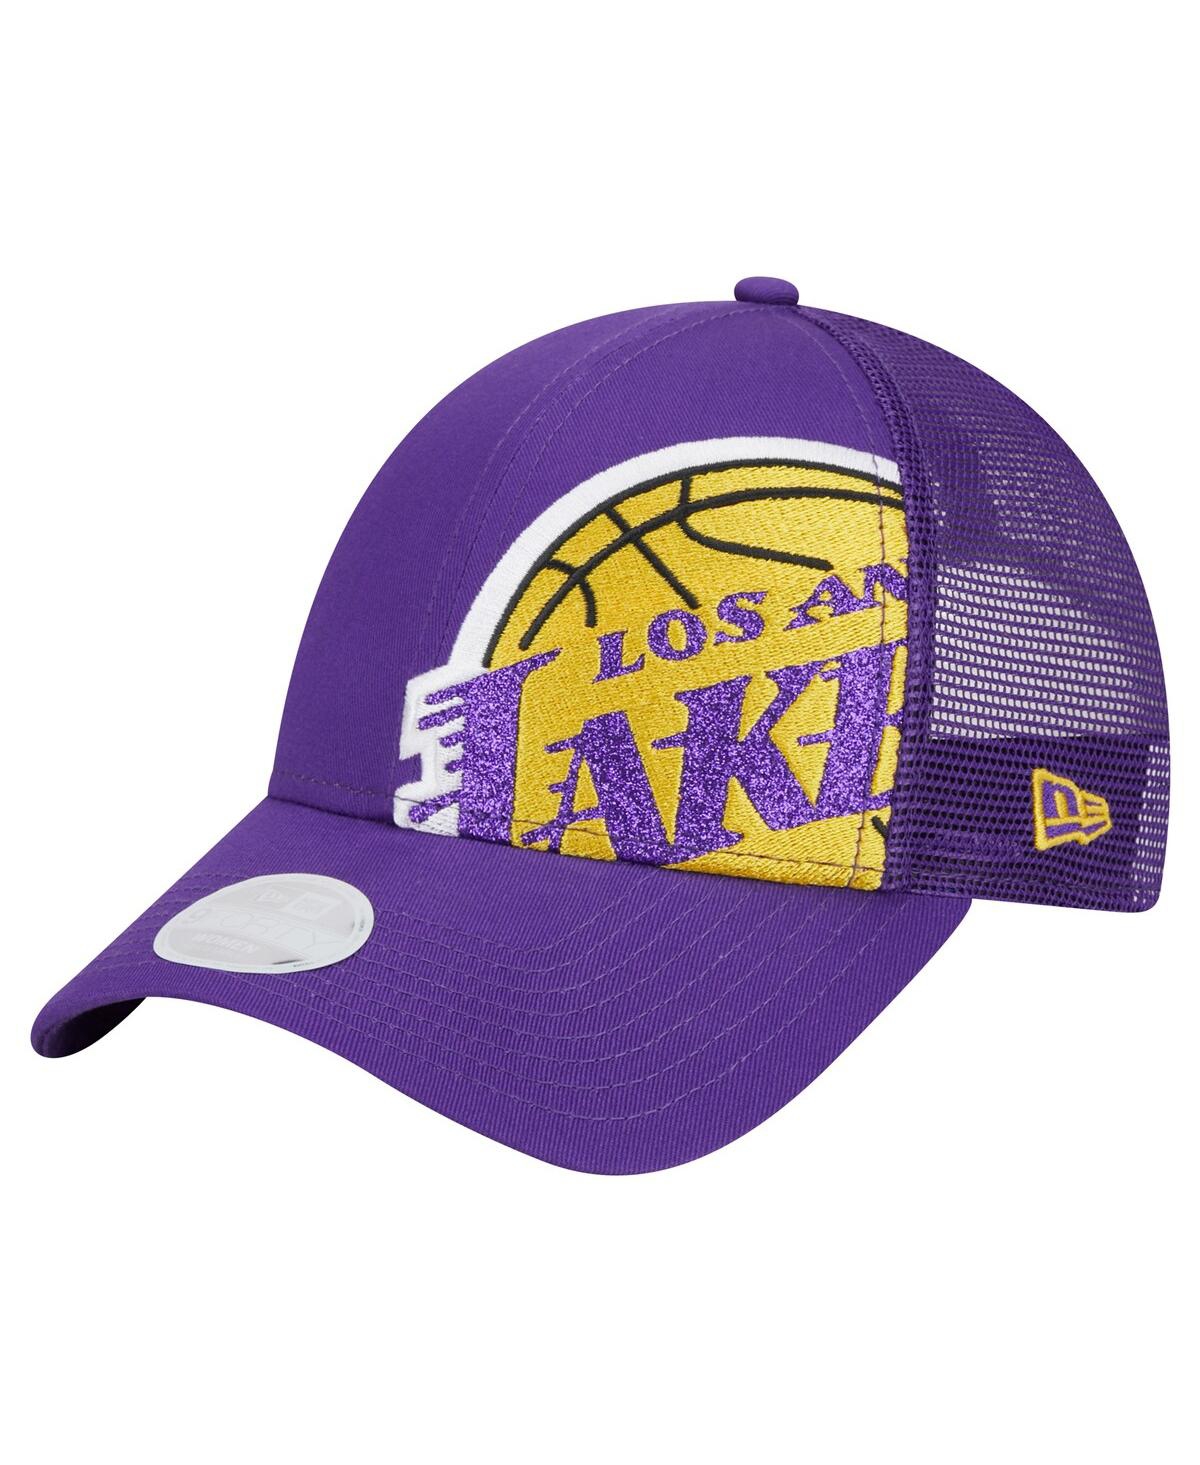 Shop New Era Women's Purple Los Angeles Lakers Game Day Sparkle Logo 9forty Adjustable Hat